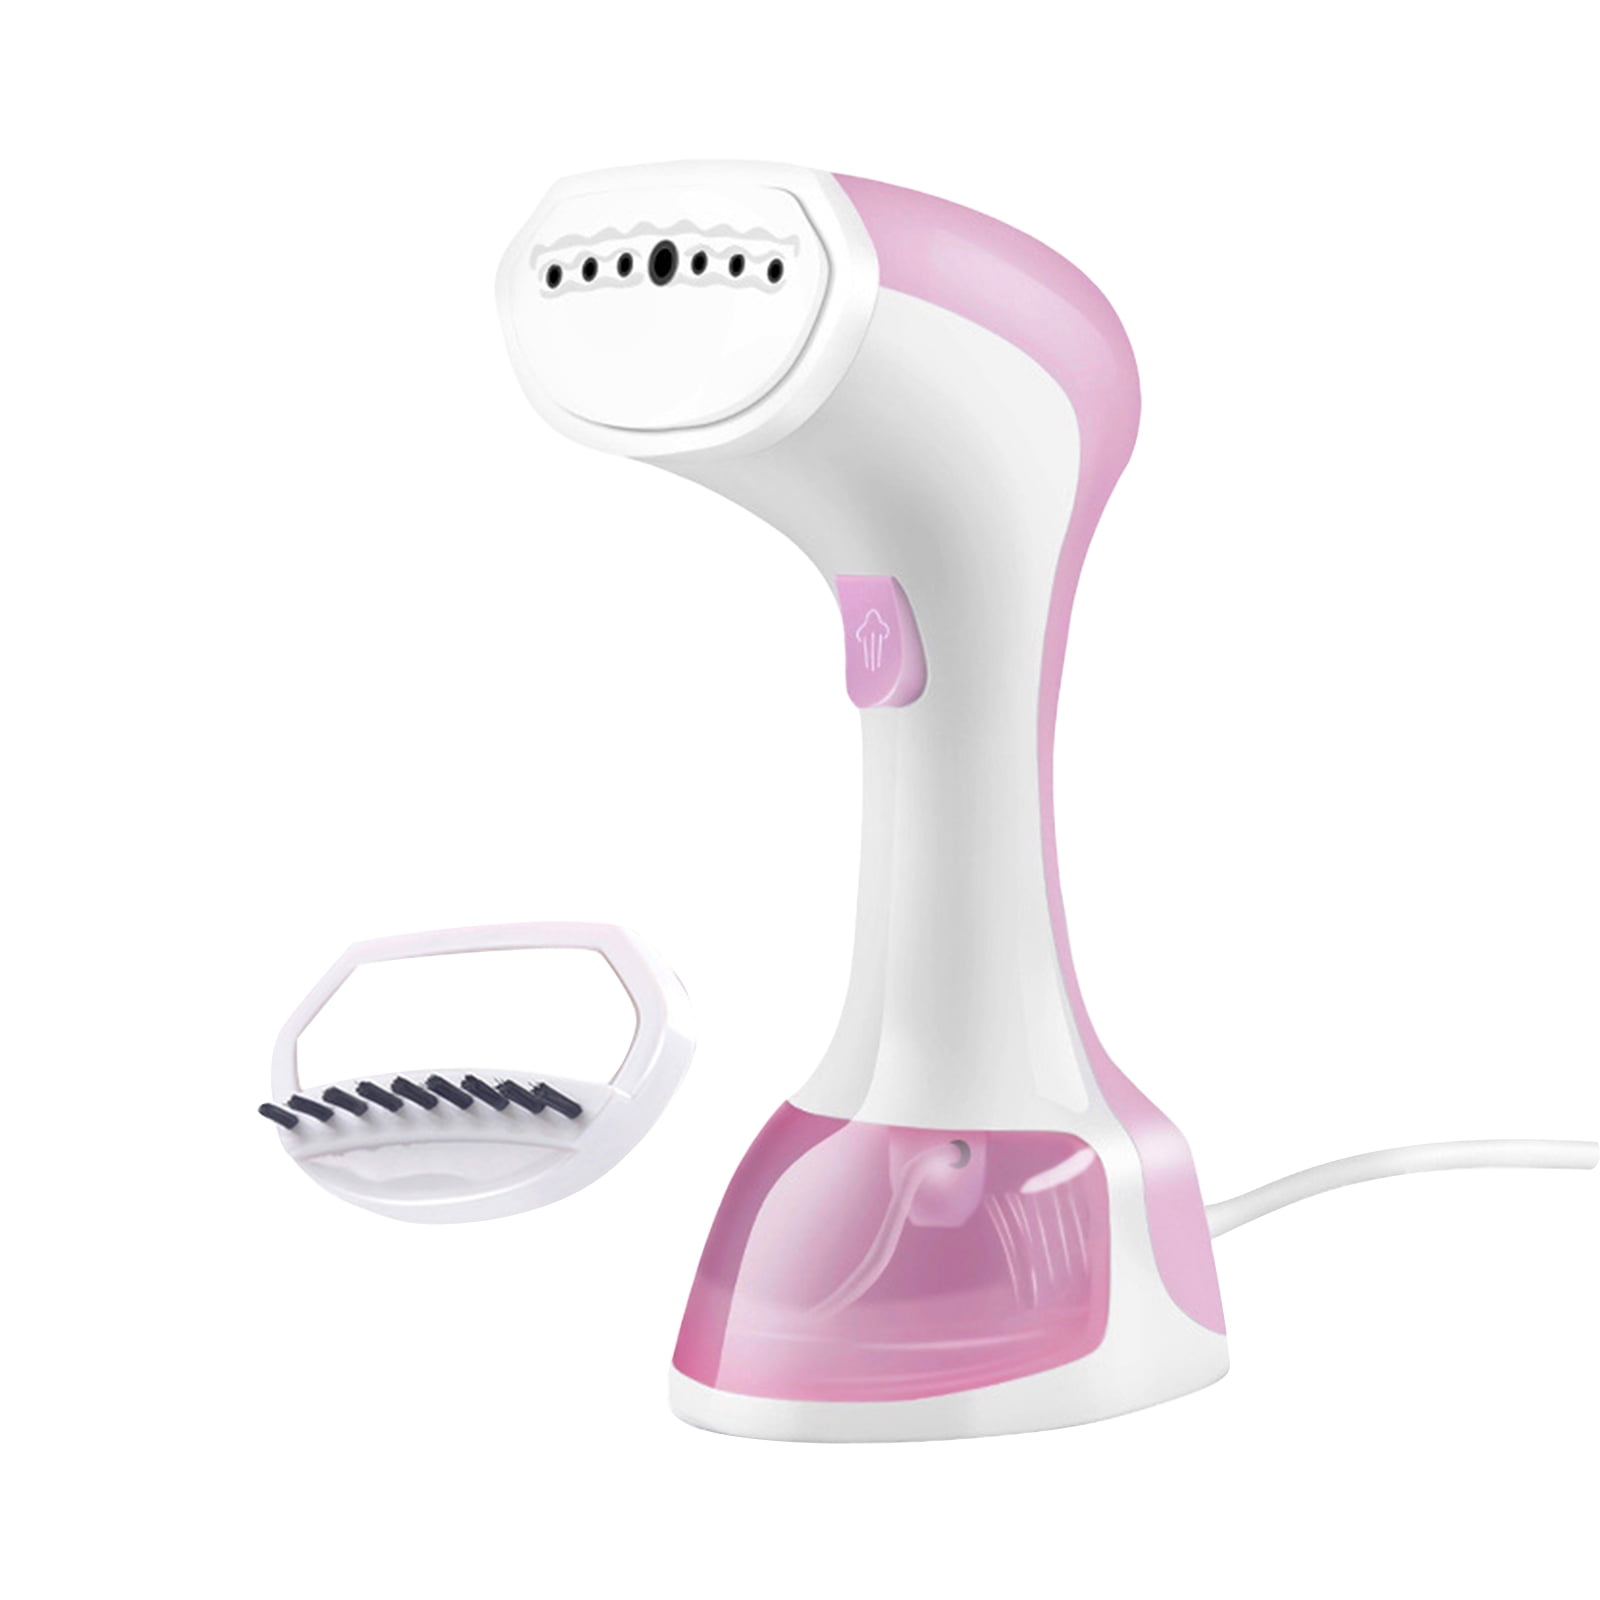 Details about   Professional Micro Steam Iron Mini Portable Handheld Steamer Garment For US 